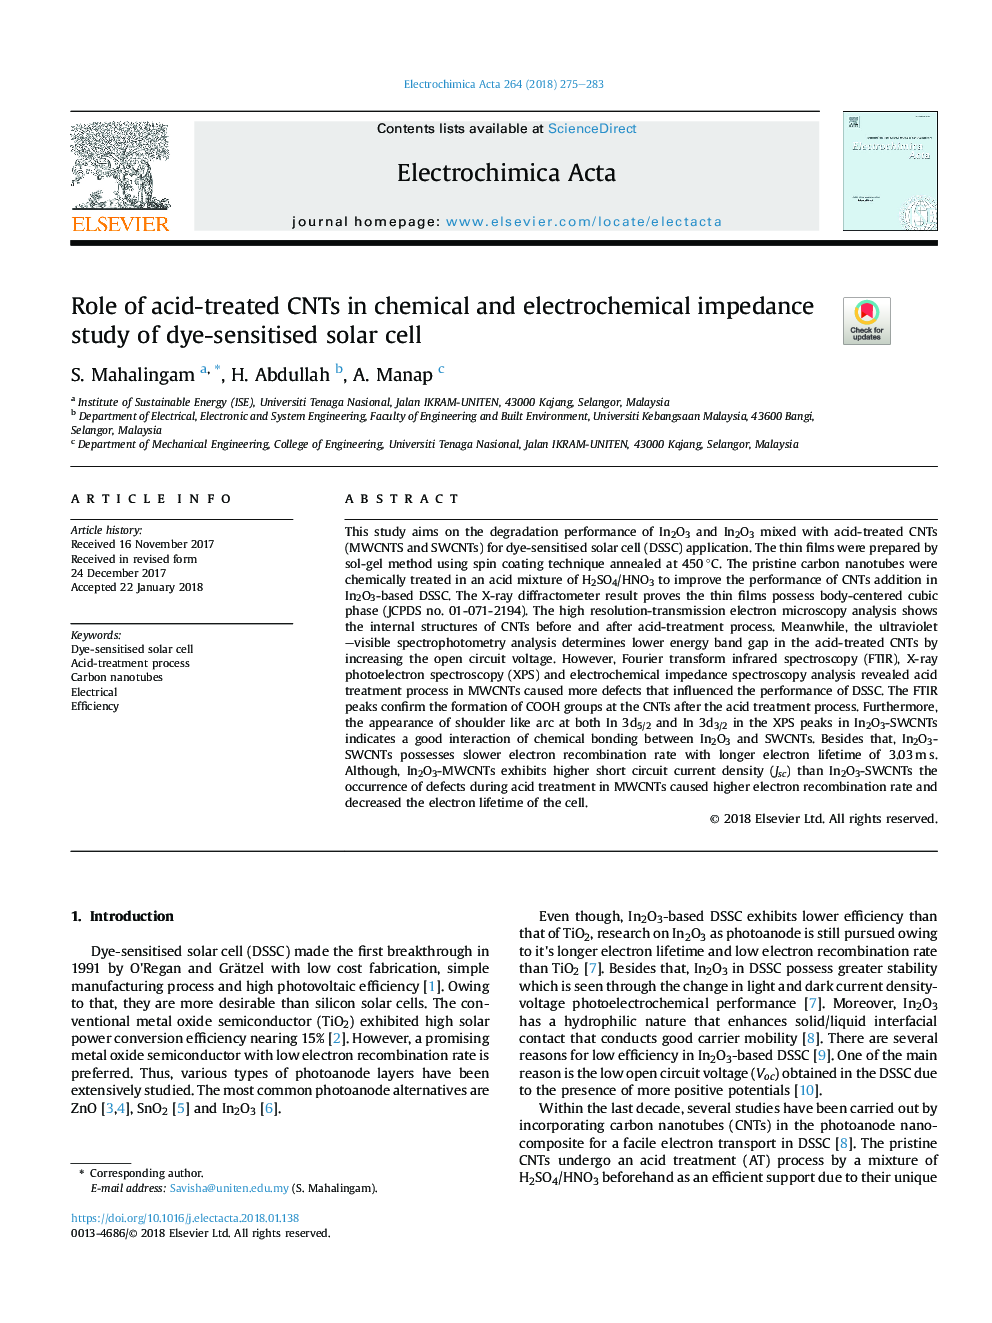 Role of acid-treated CNTs in chemical and electrochemical impedance study of dye-sensitised solar cell